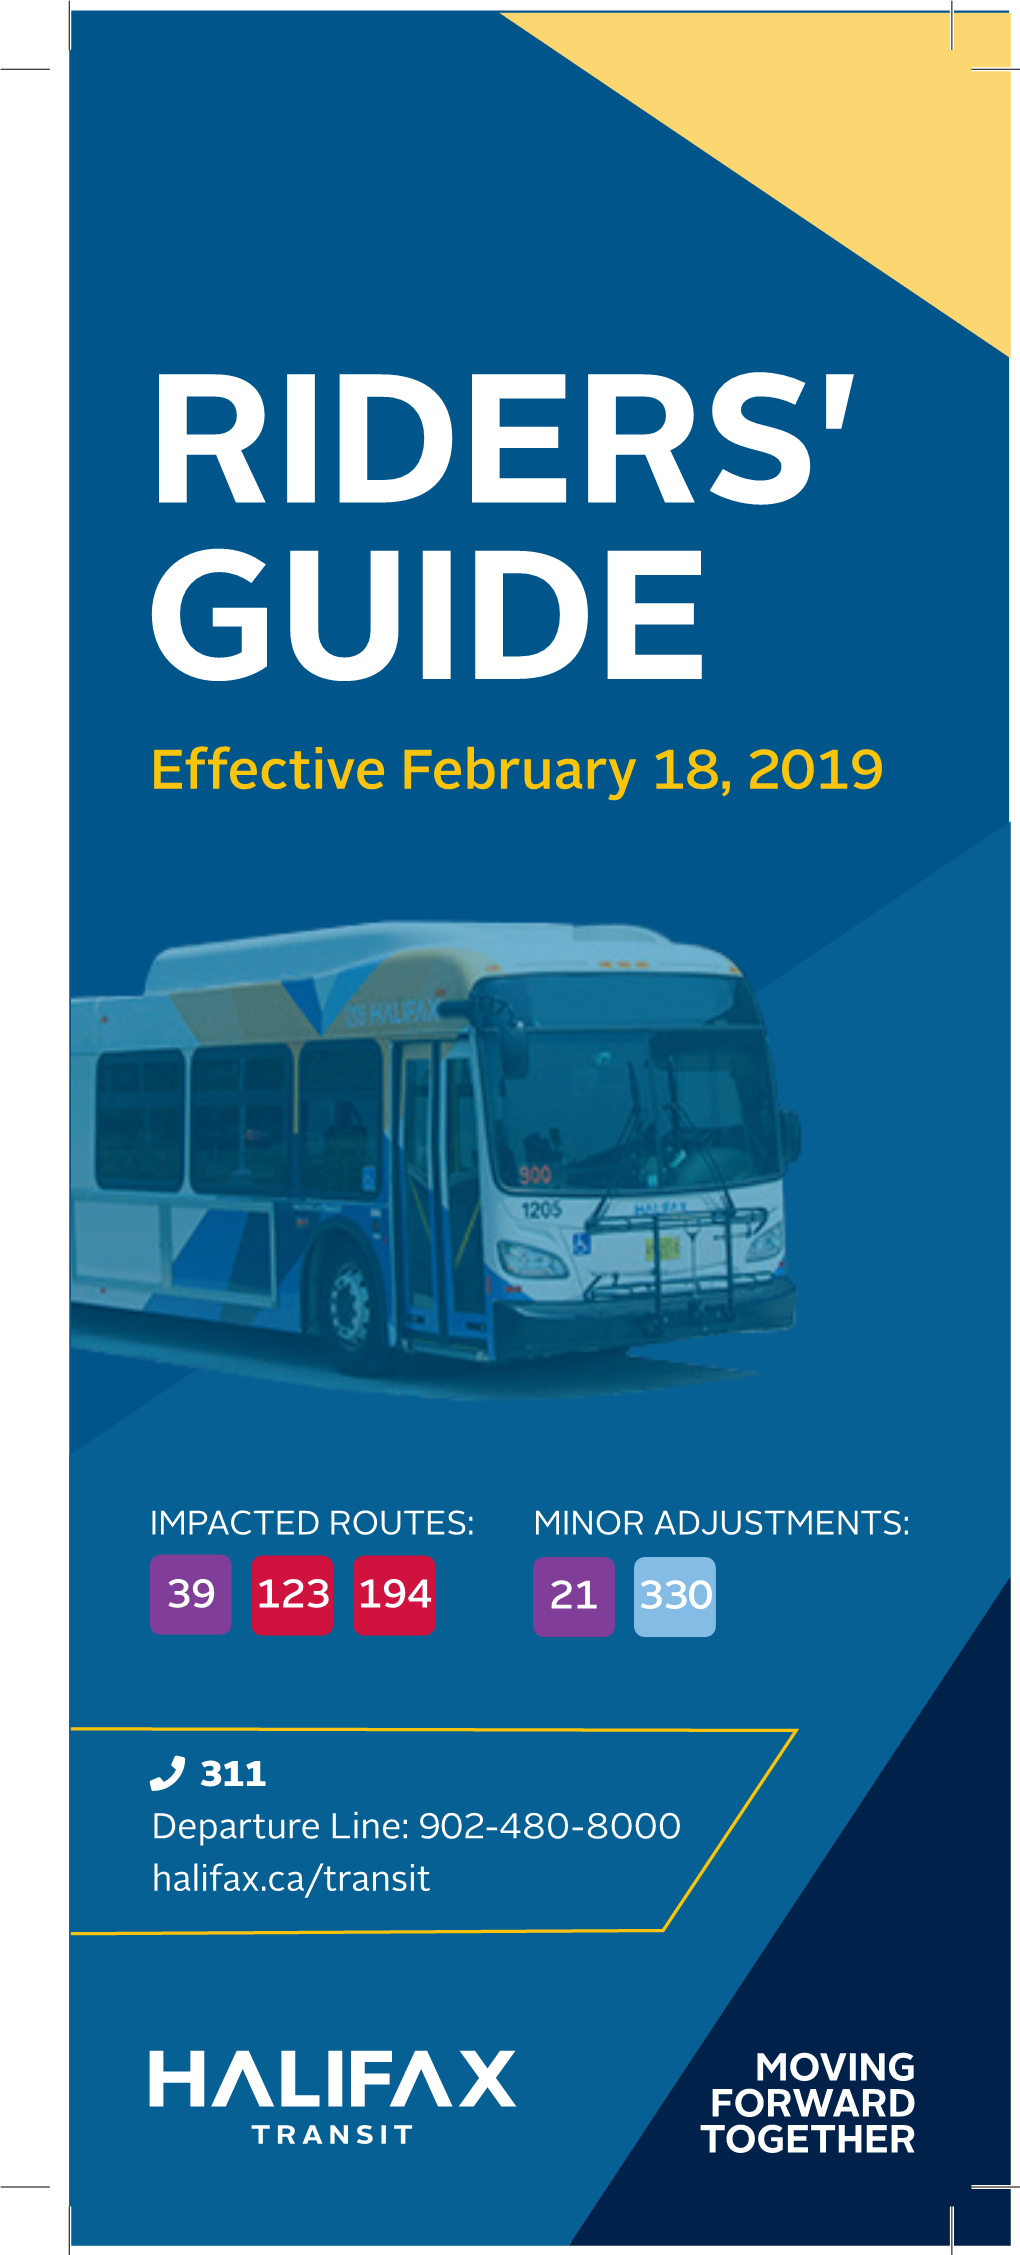 RIDERS' GUIDE Effective February 18, 2019